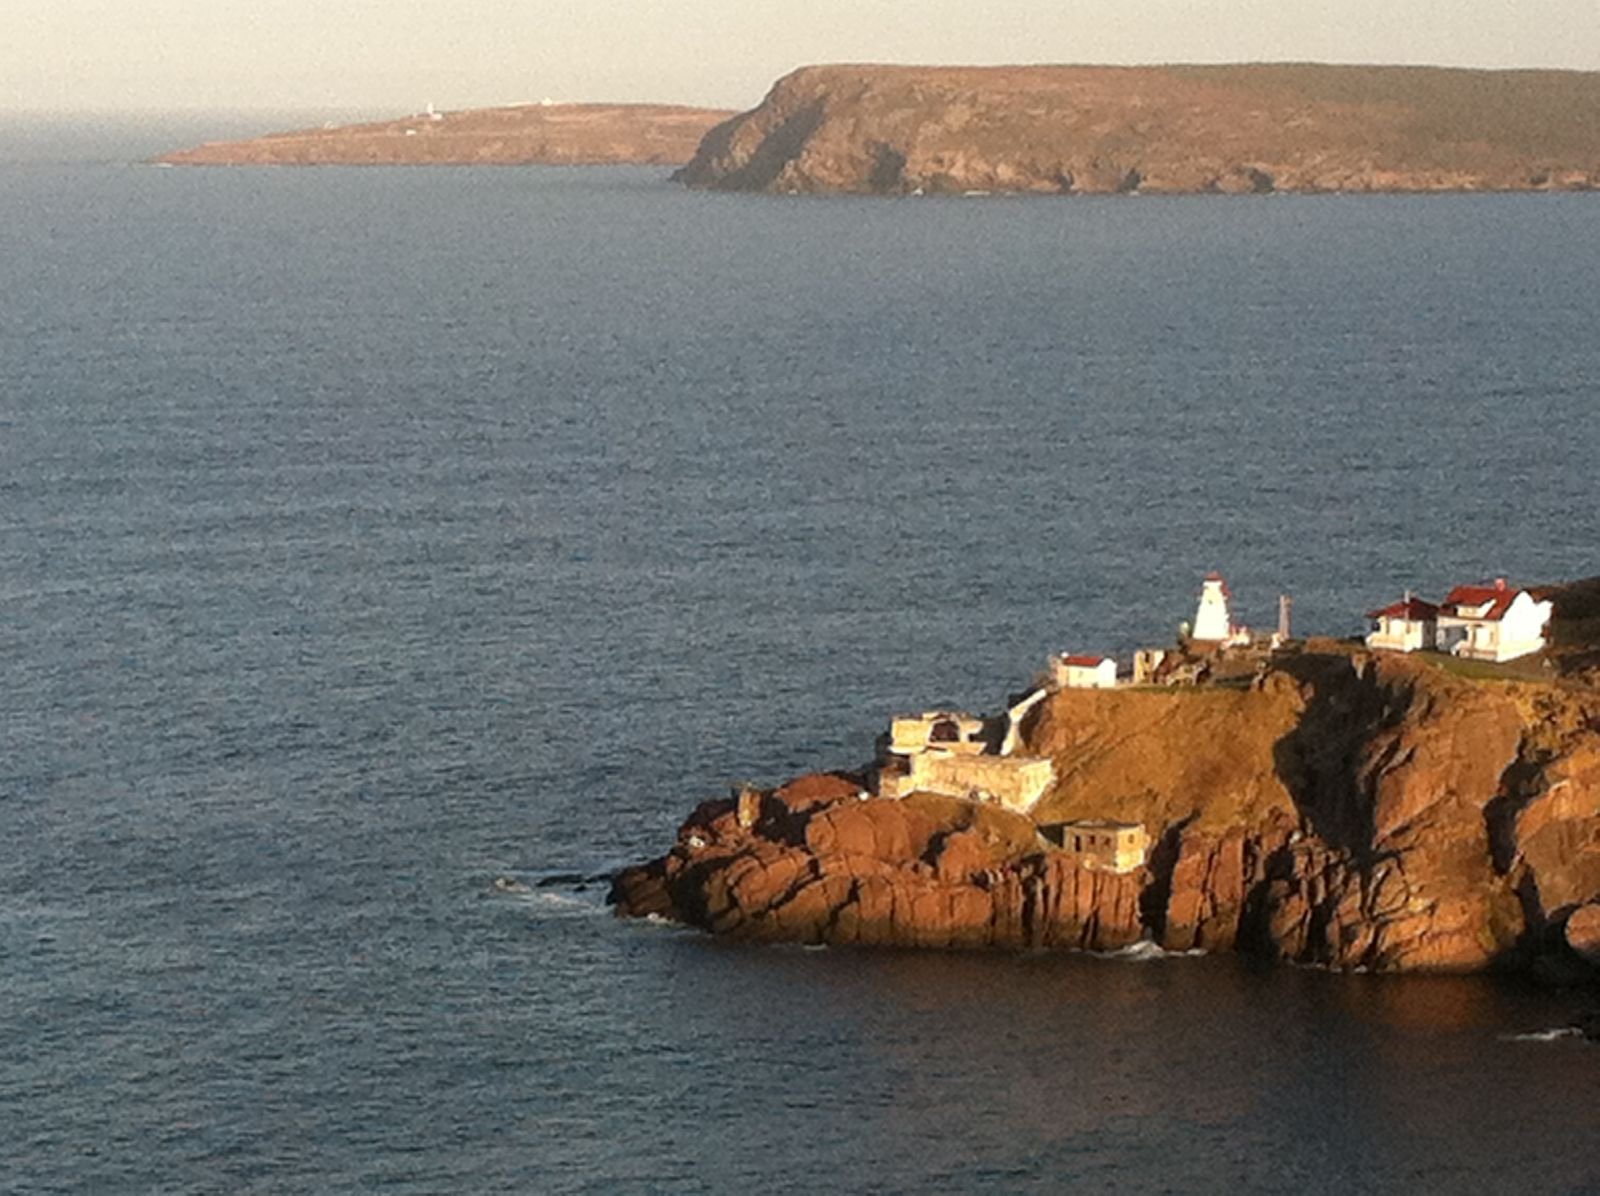 Cape Spear and Fort Amherst